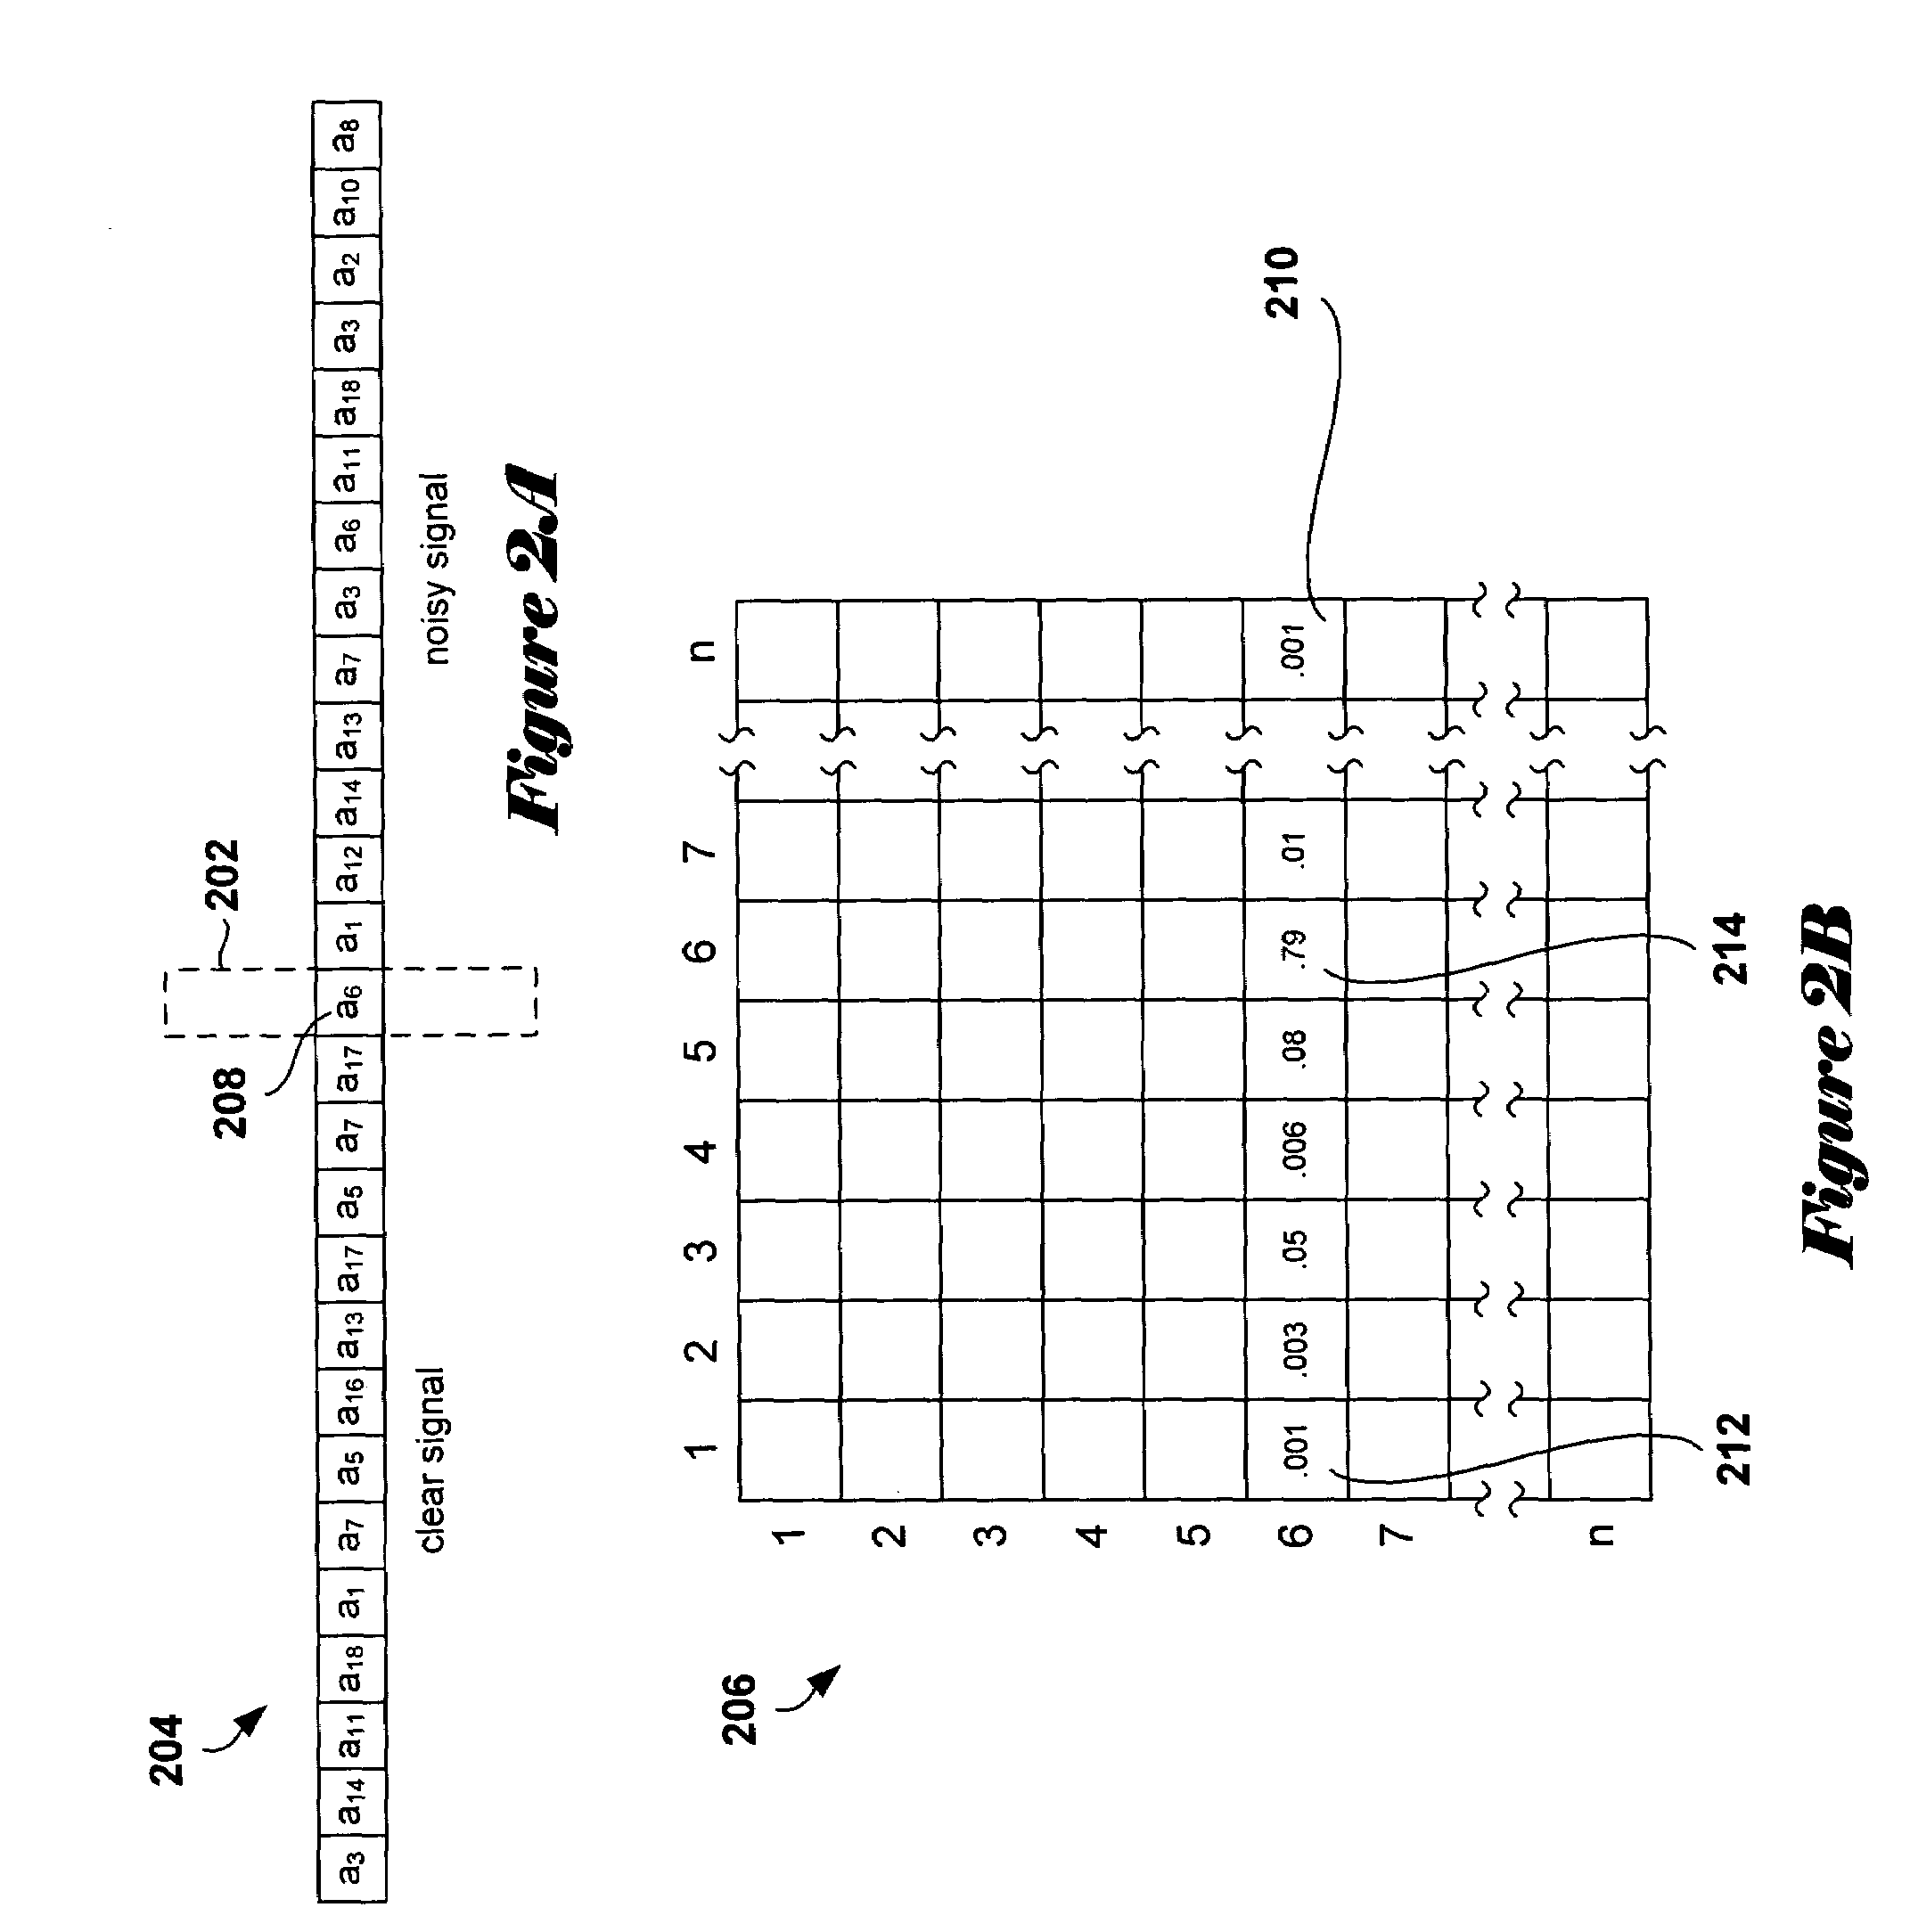 Method and system for determining an optimal or near optimal set of contexts by constructing a multi-directional context tree